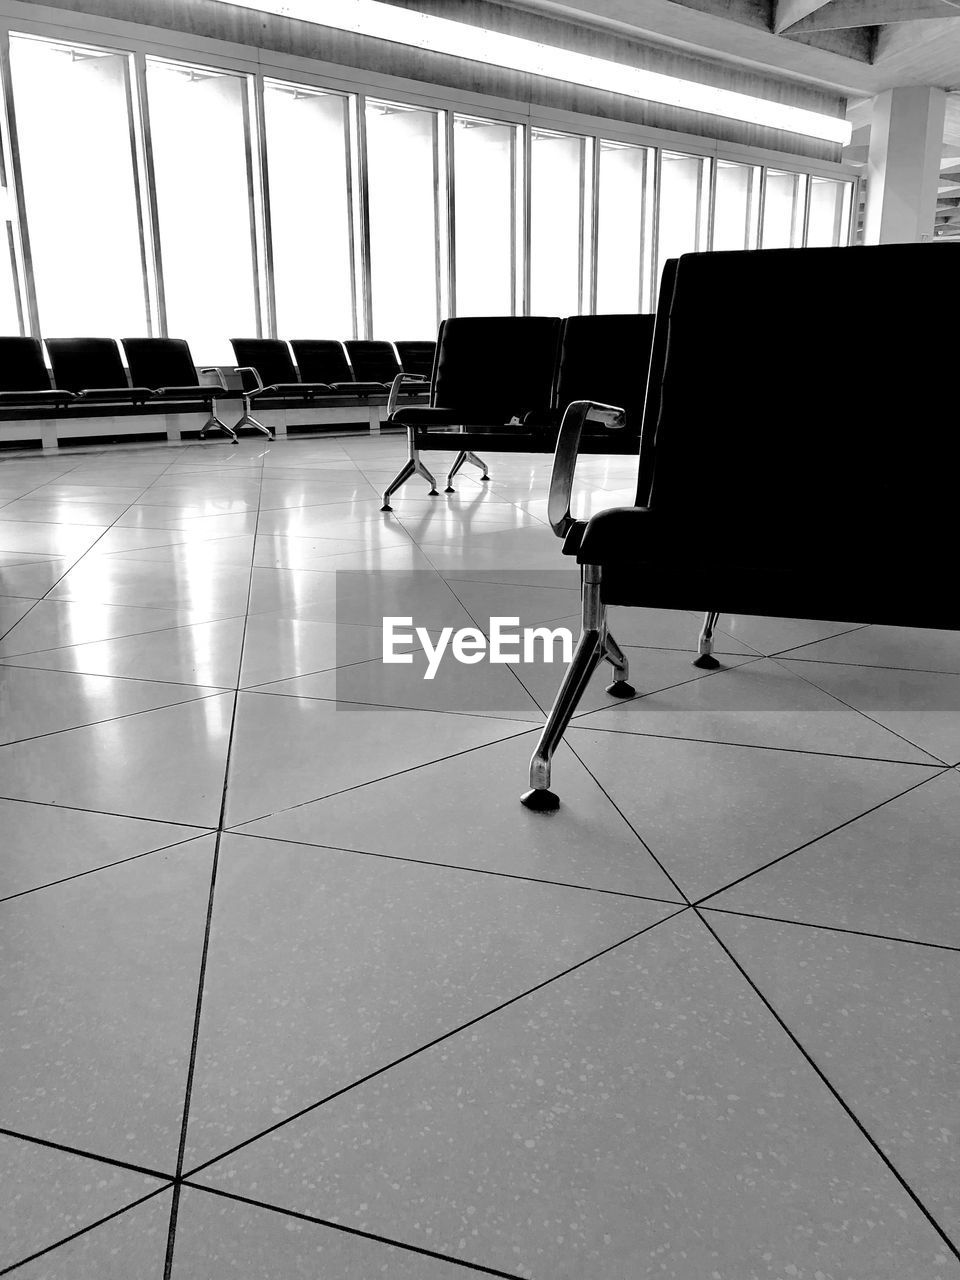 VIEW OF EMPTY CHAIRS IN AIRPORT